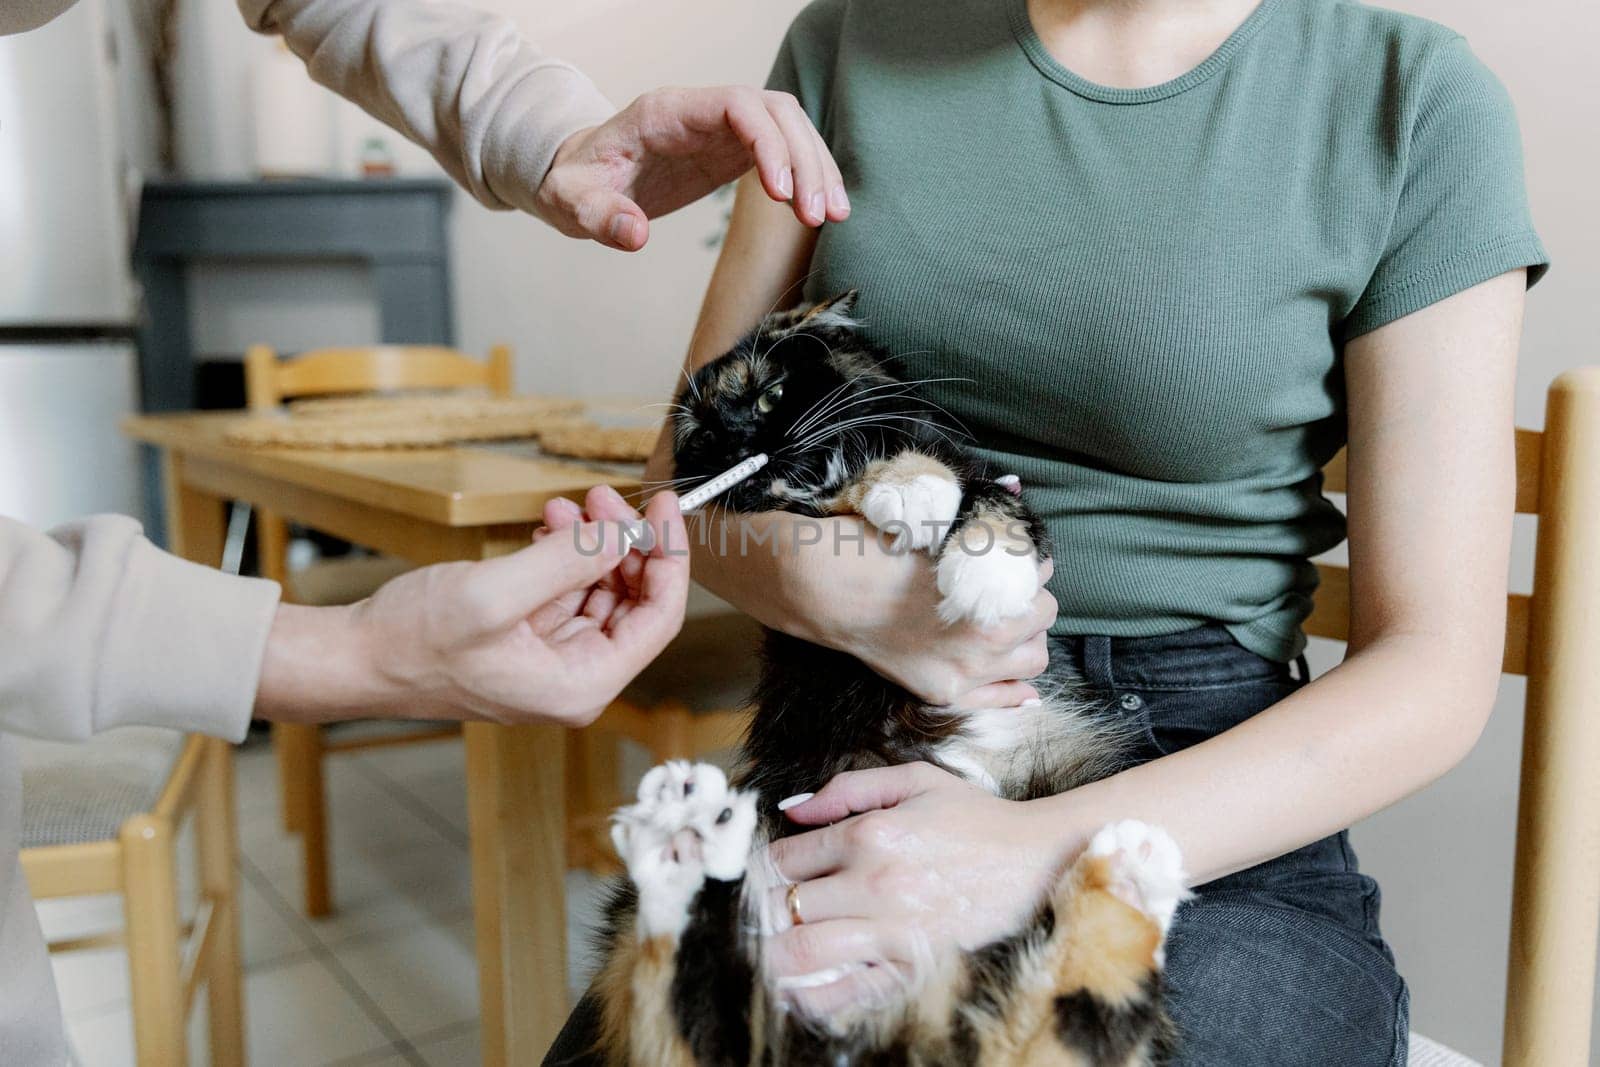 A young Caucasian unrecognizable man pours medicinal liquid with a syringe into the mouth of a cat sitting in the arms of a girl, close-up side view.